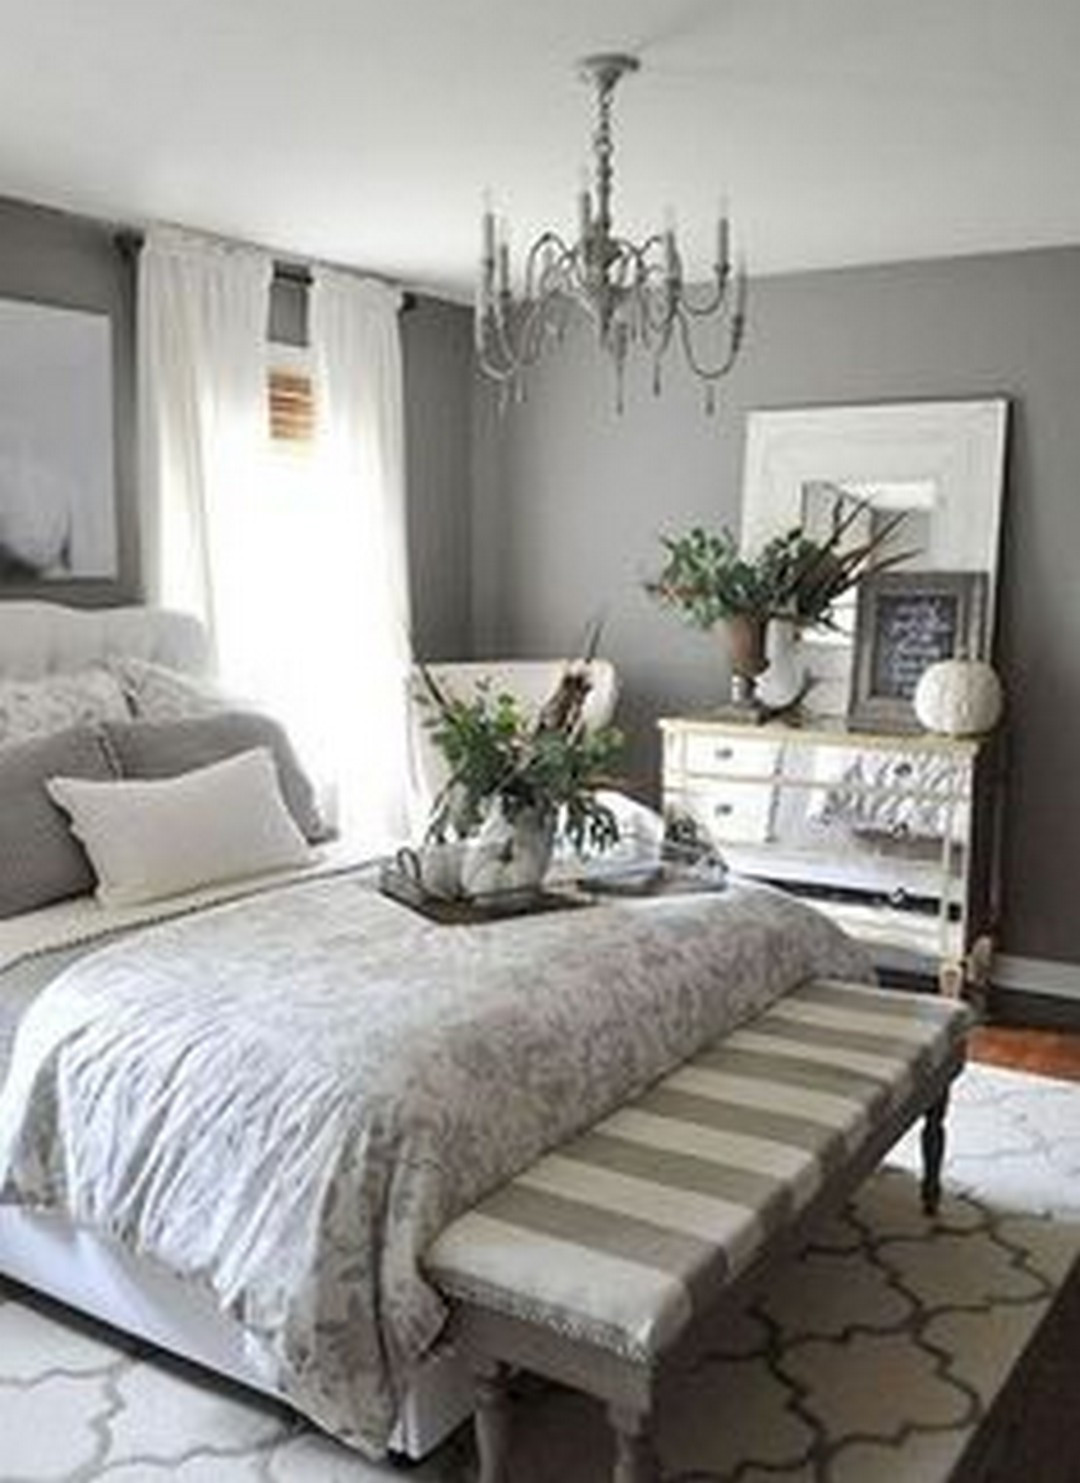 Master Bedroom Comforter Ideas
 How to Maximize Bedding Appearance by Applying Farmhouse